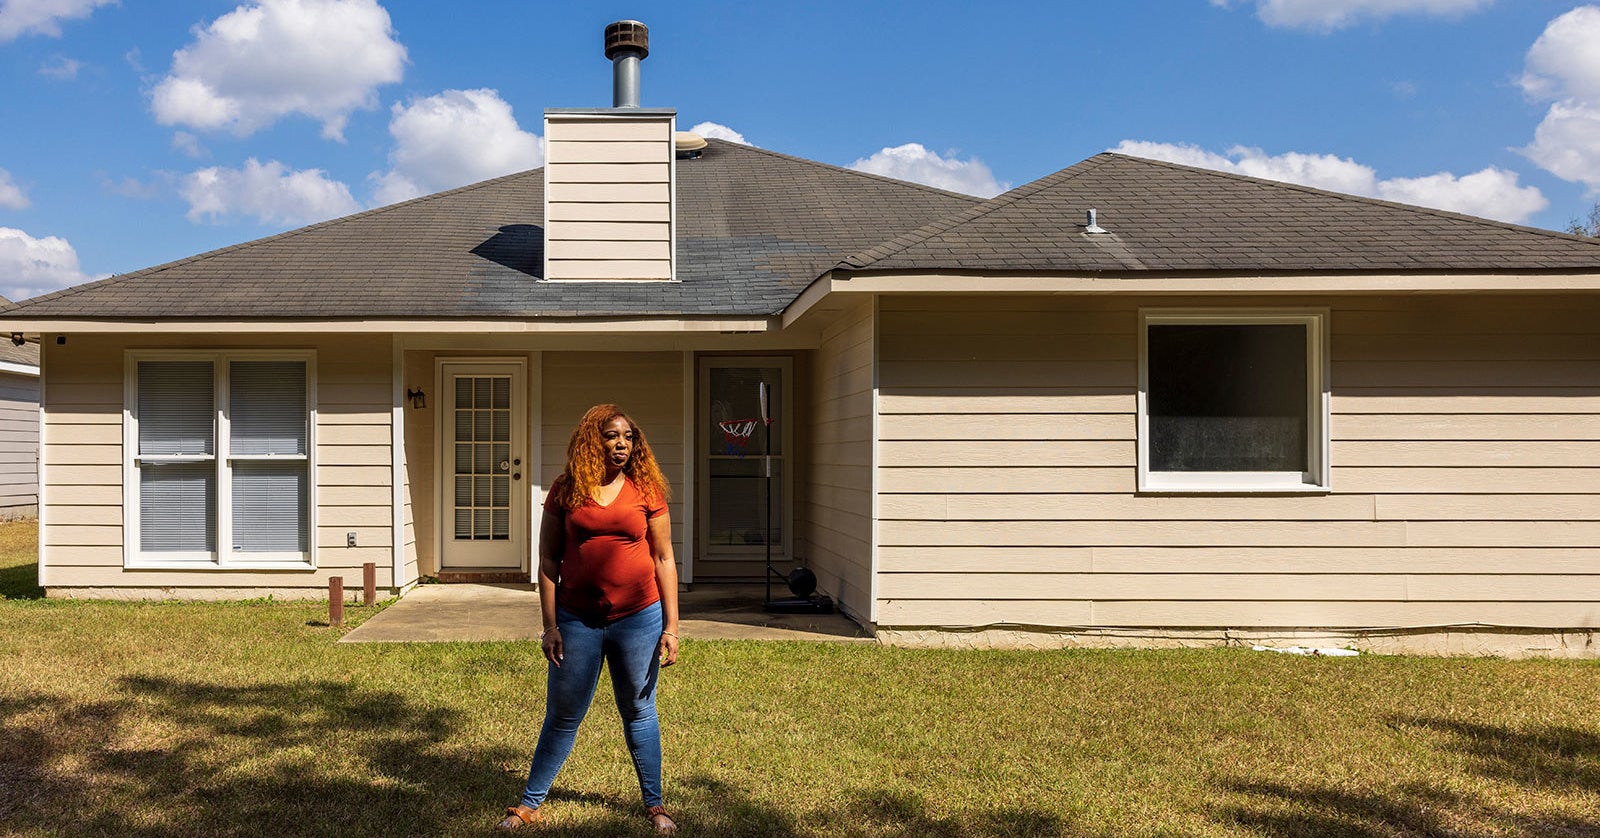 She Bought Her House As The Market Peaked. Now She Regrets It.